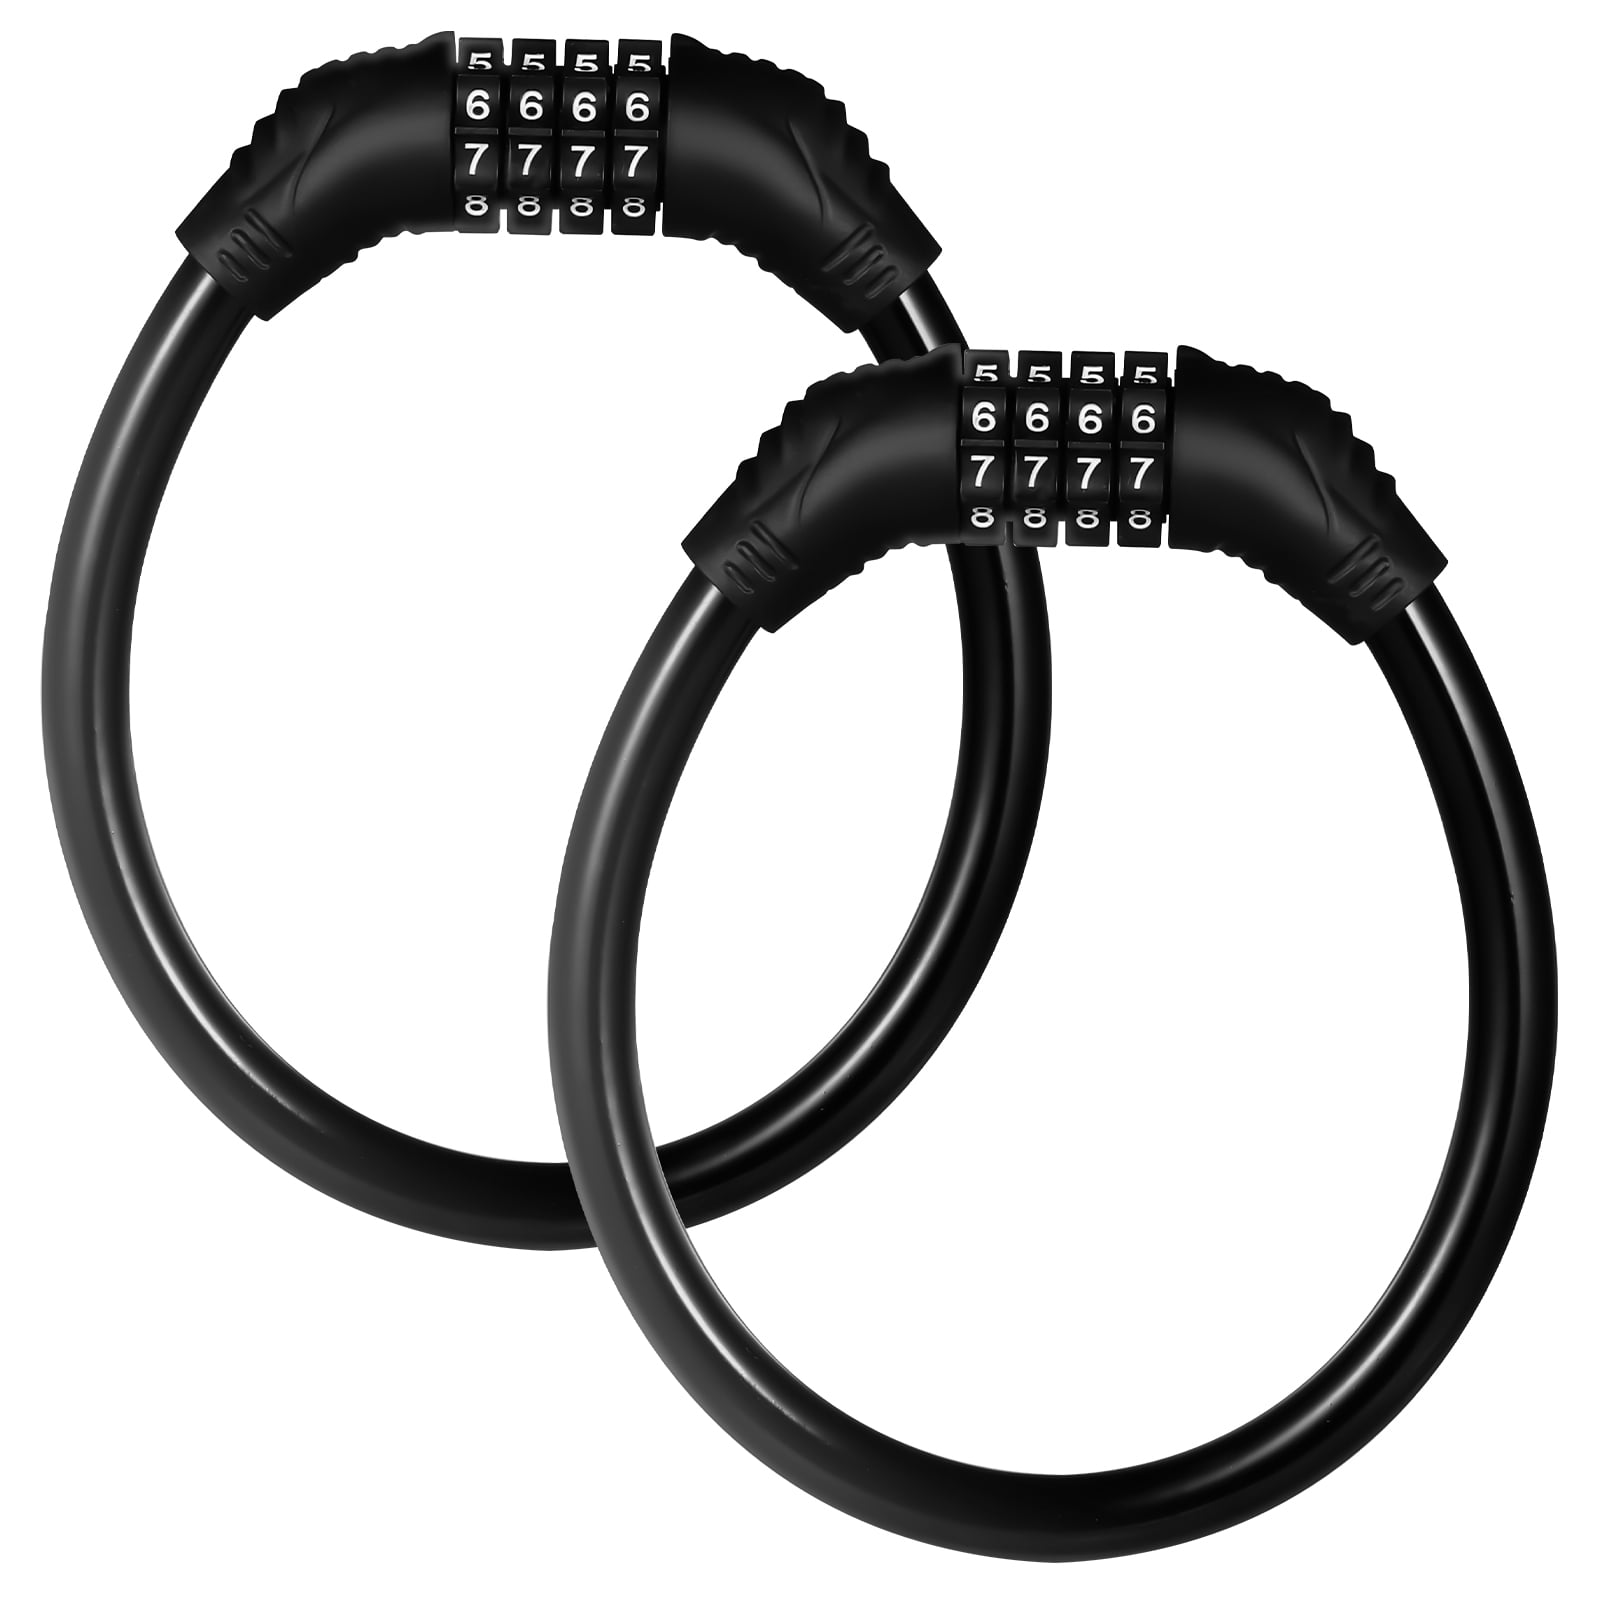 Bike Lock Cable, Bike Accessories, Bike Locks Heavy Duty Anti Theft,  Combination Cable Lock for Outdoor Equipment, Black (2Ps, 1Ft, Reset Combo)